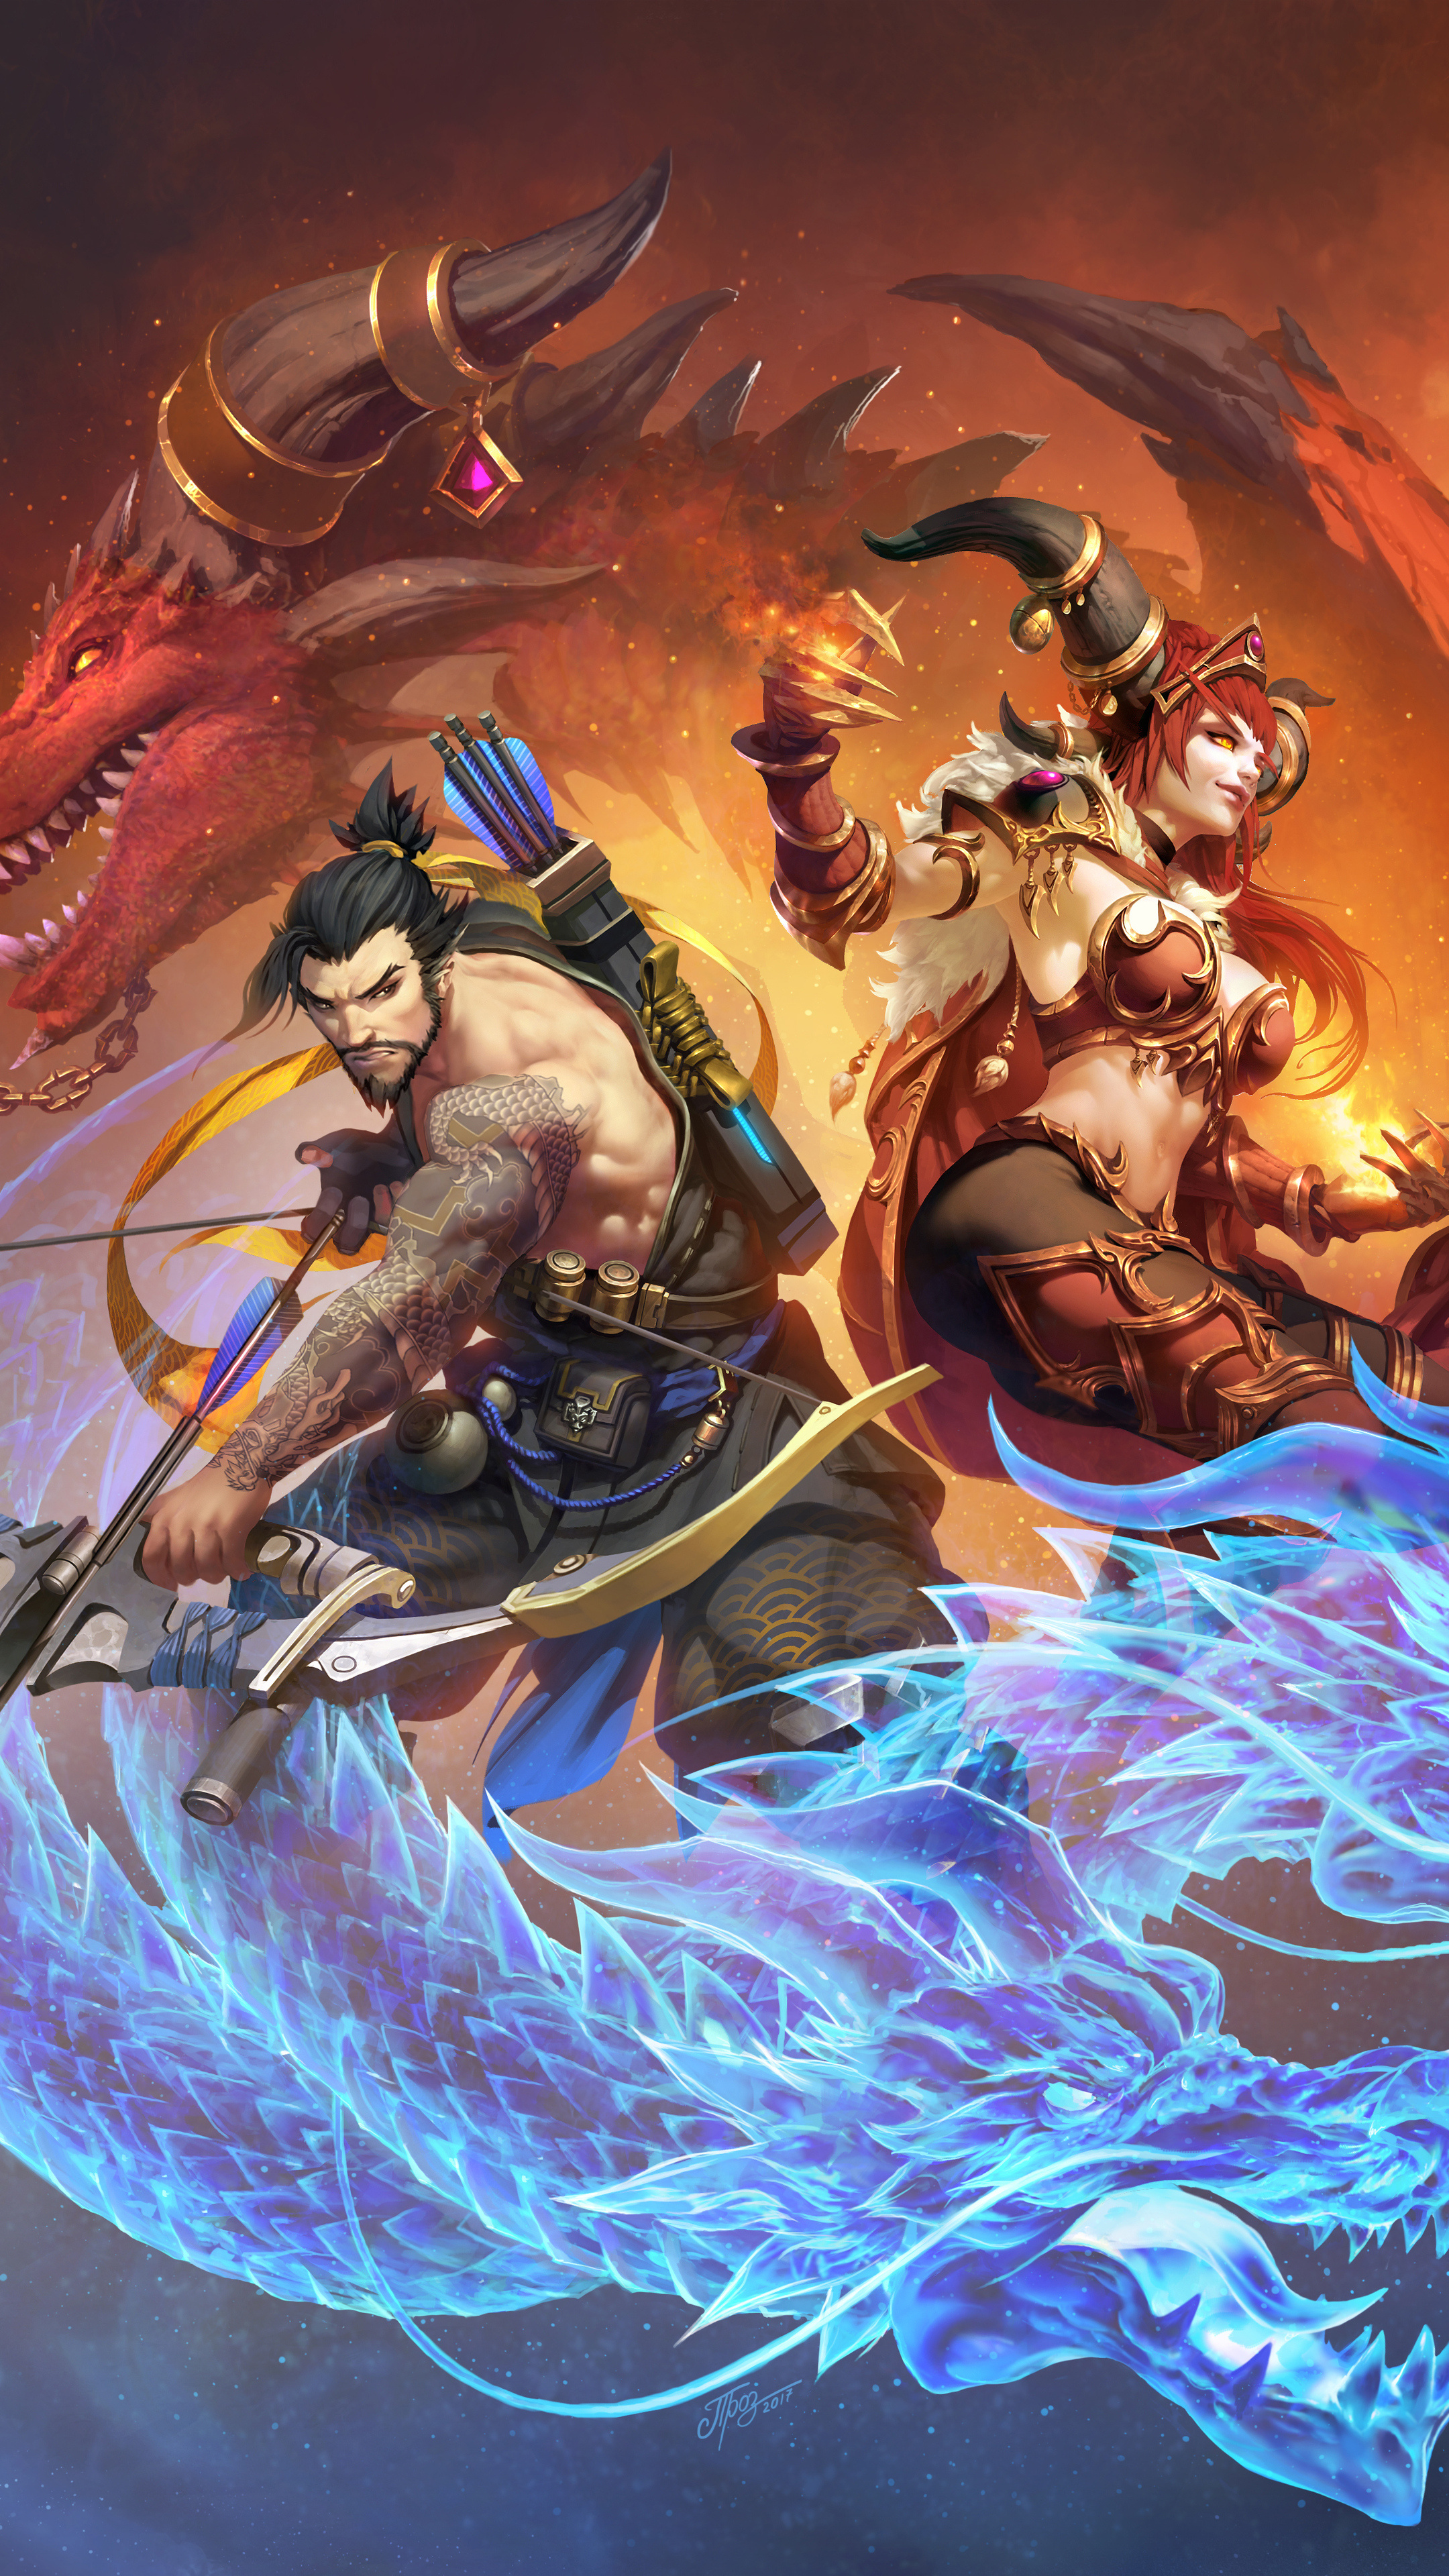 Dragons of Hanzo, 4k gaming wallpapers, Sony Xperia premium, High-definition images, 2160x3840 4K Handy